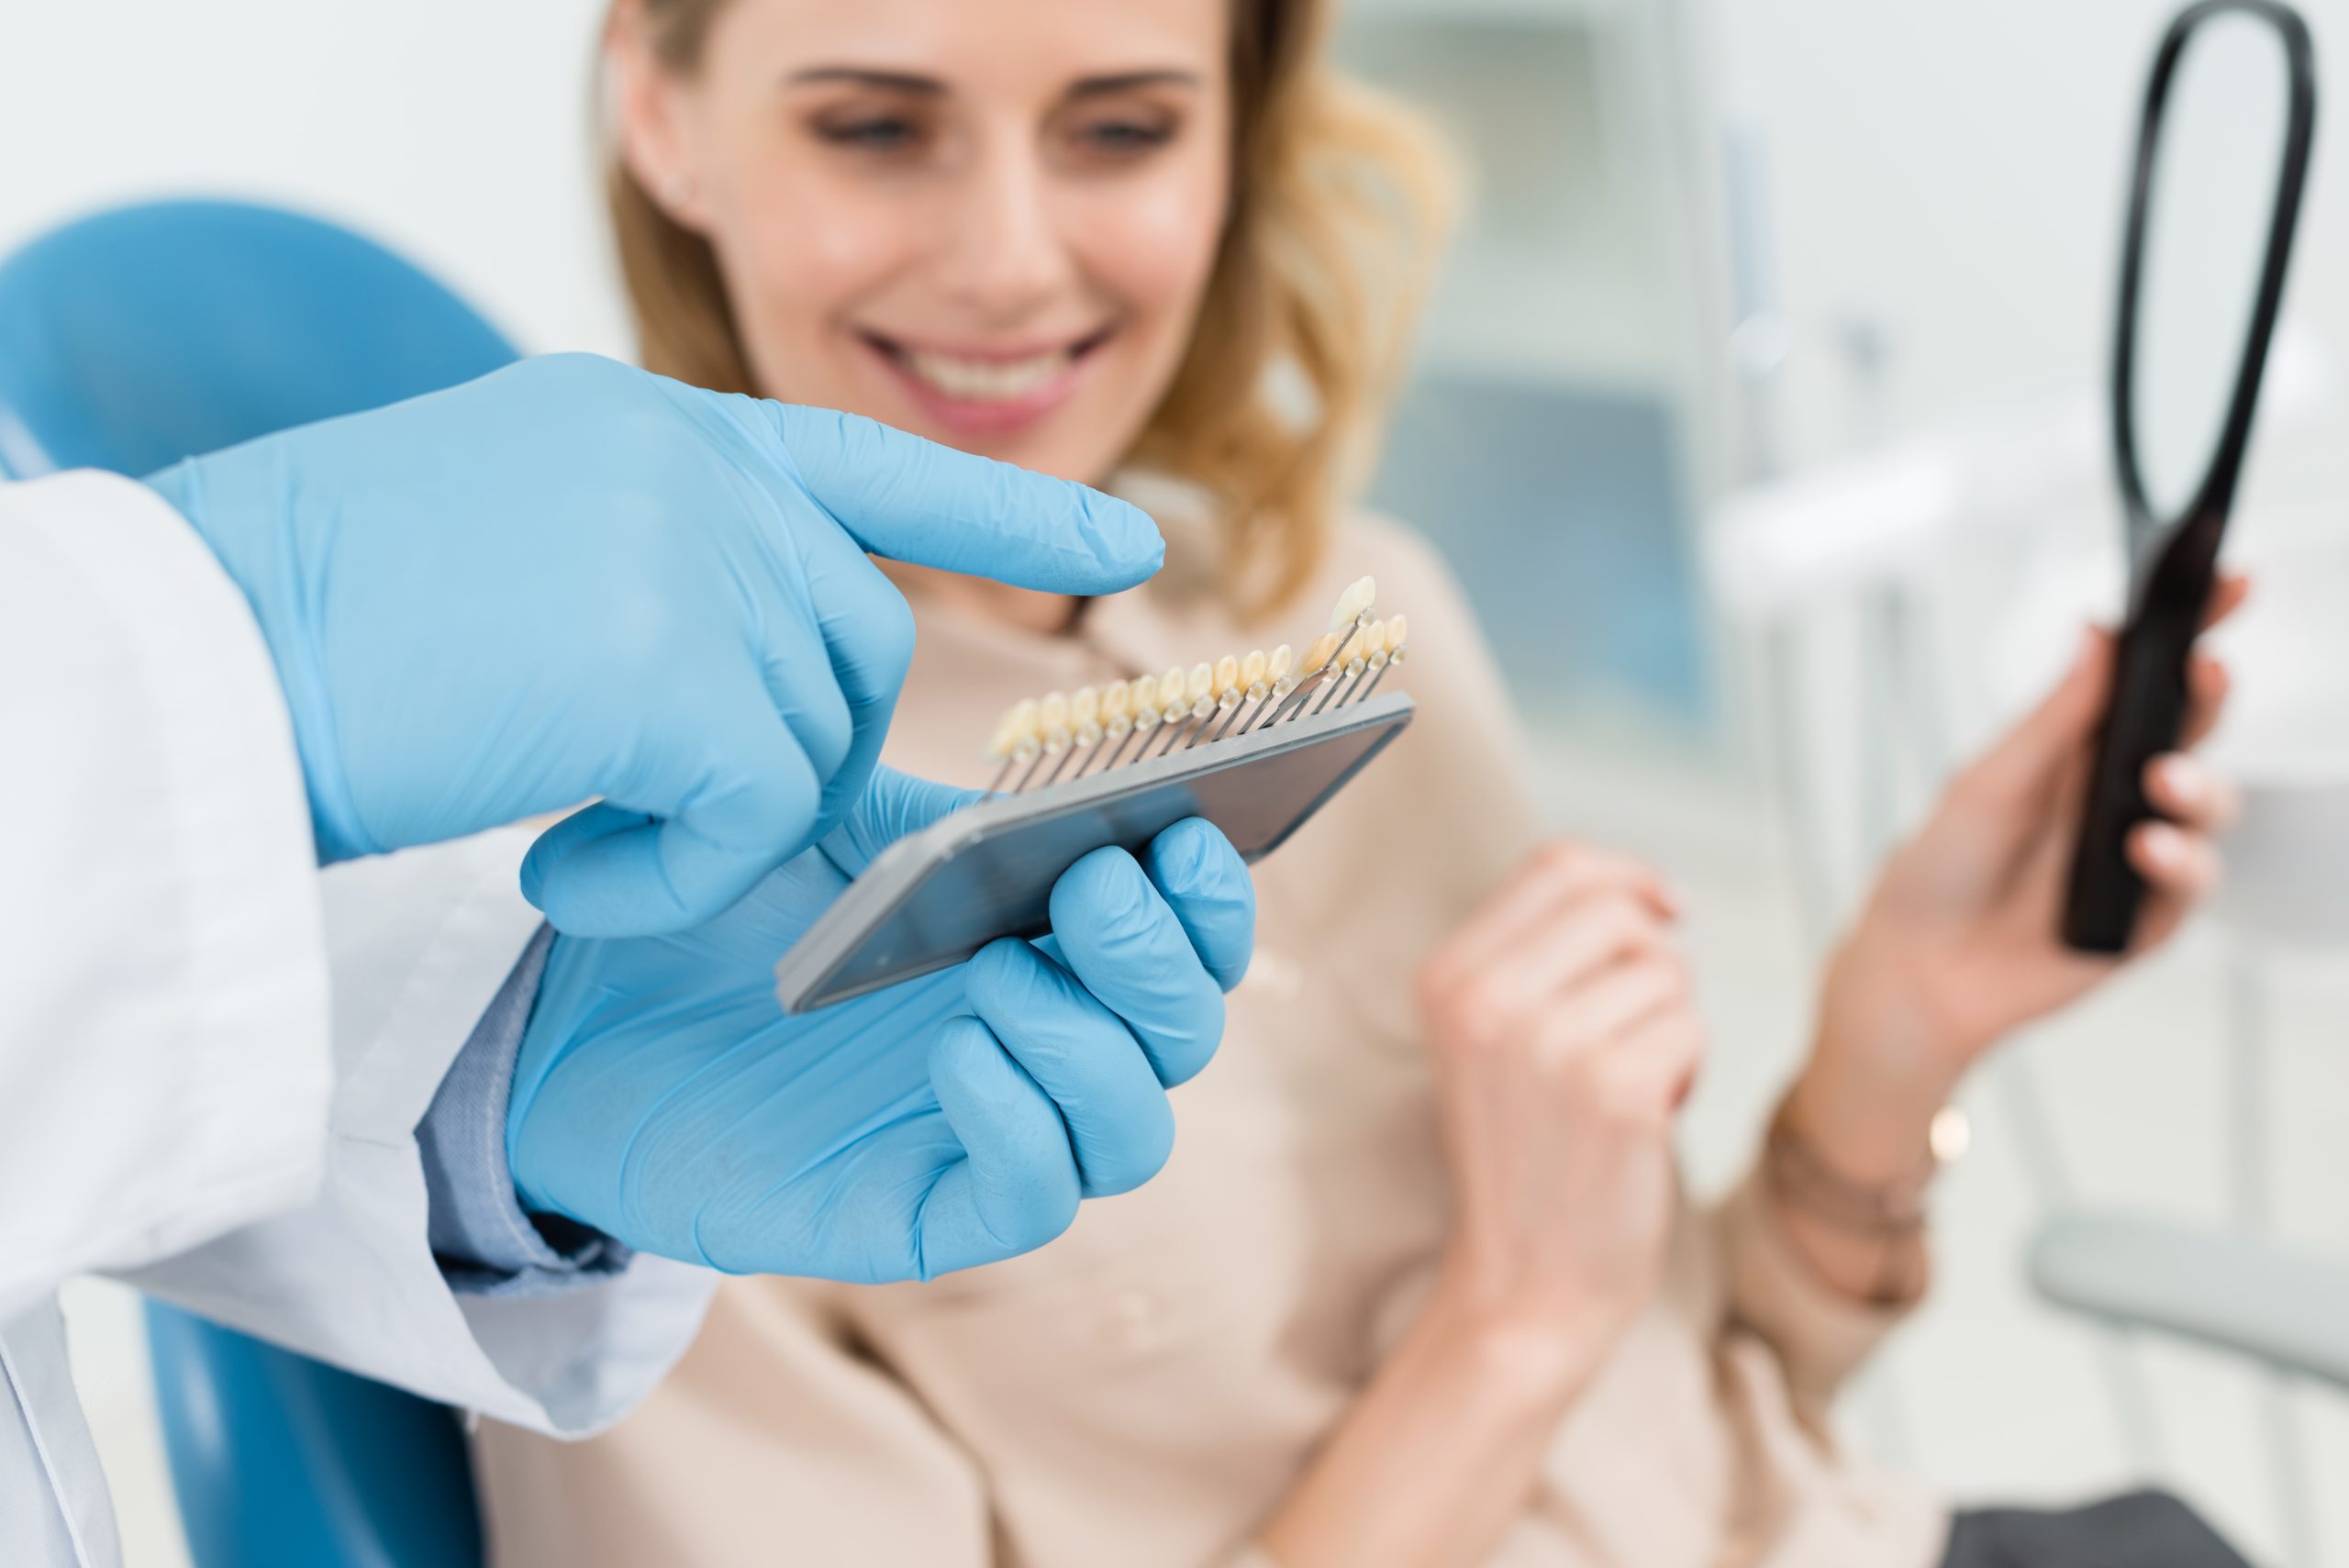 How long does a single tooth implant procedure typically take?